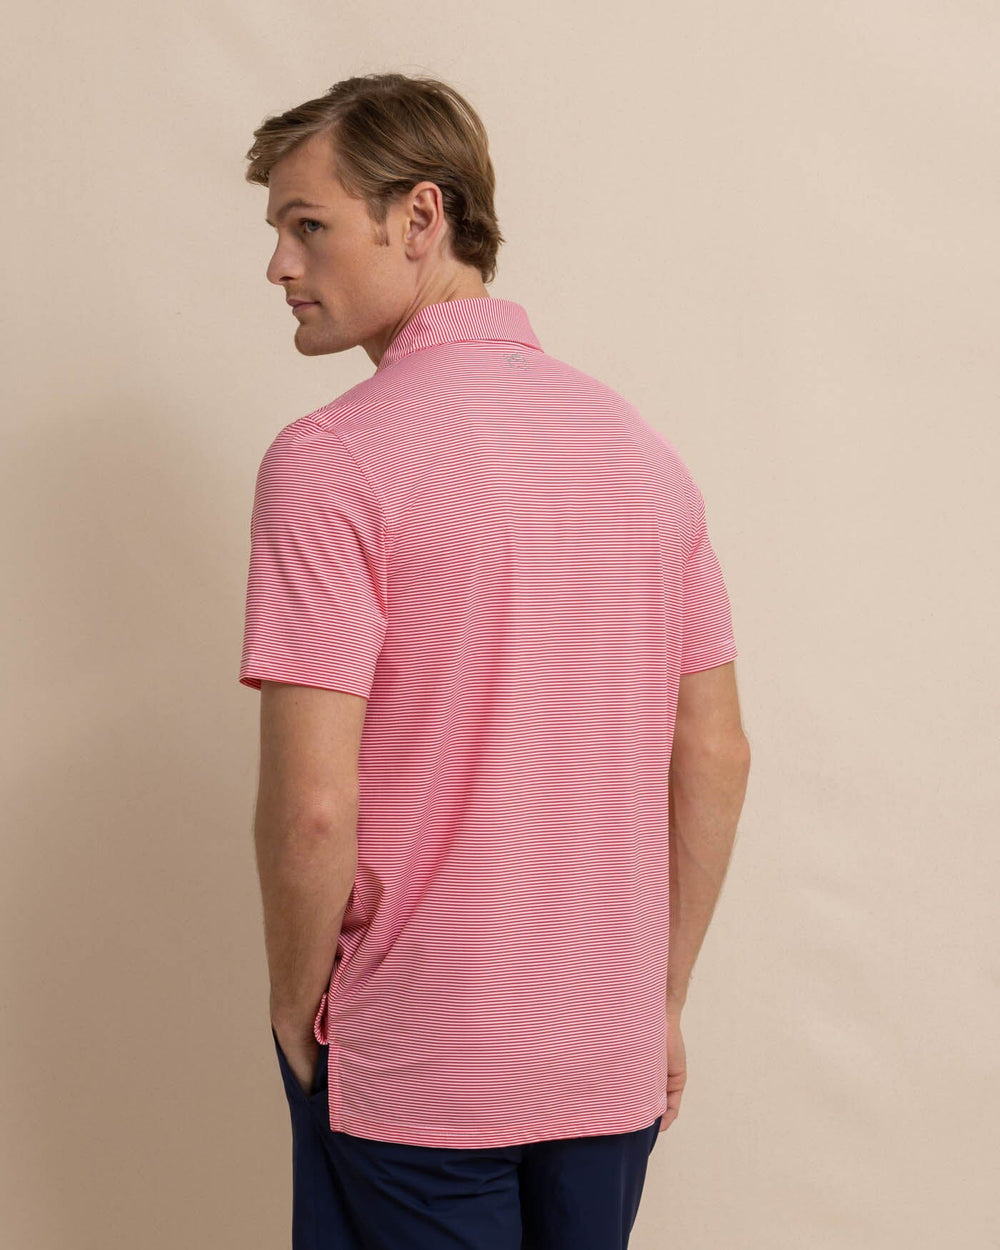 The back view of the Southern Tide brrr-eeze-meadowbrook-stripe-polo by Southern Tide - Teaberry Pink